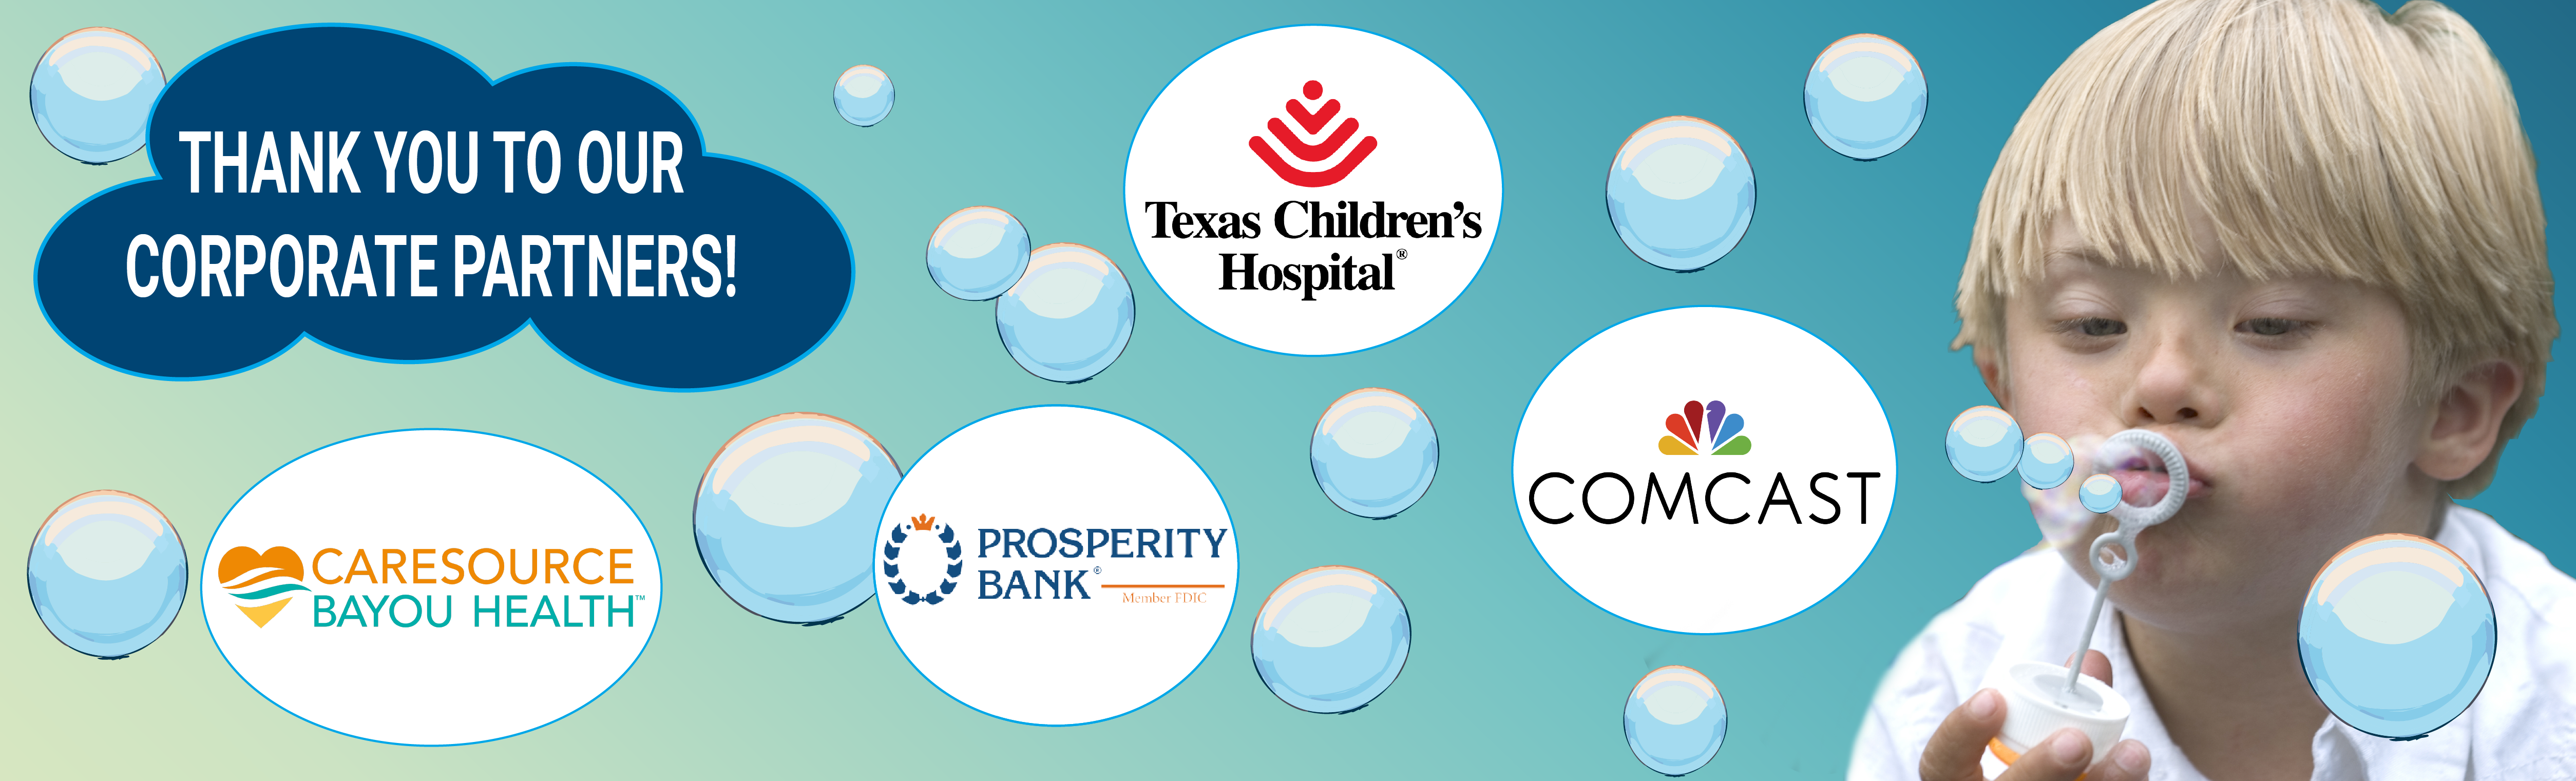 Thank You, Corporate Partners!